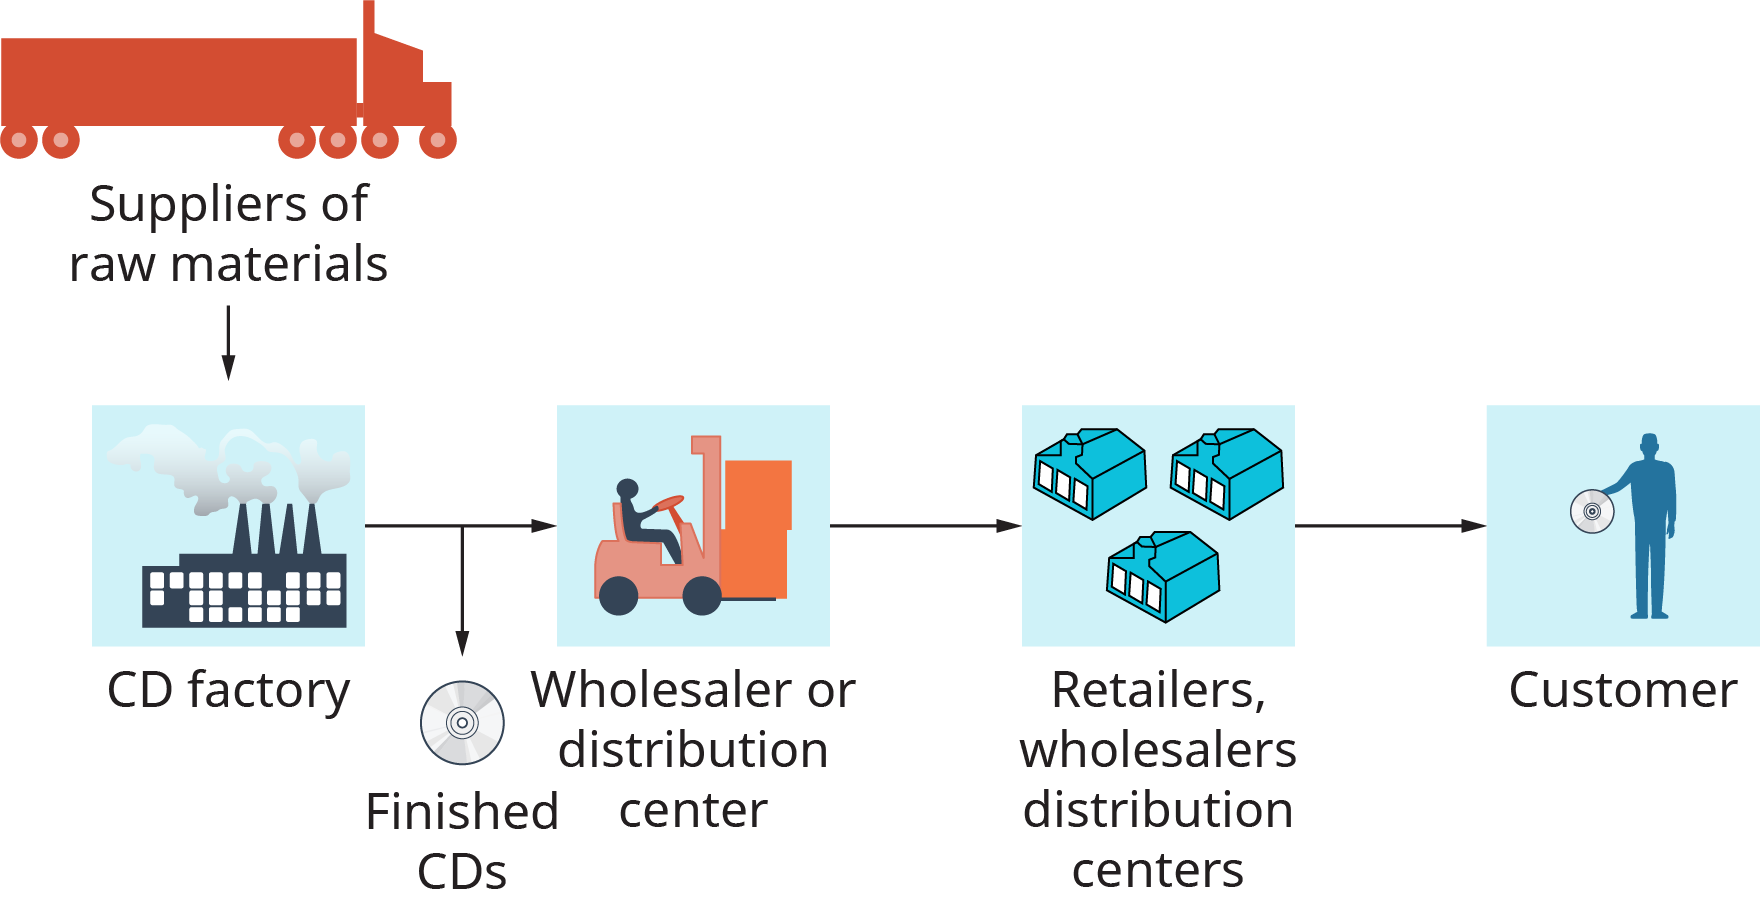 The illustration shows a large truck as a supplier of raw materials. These are passed to a C D factory. Finished C Ds are sent to a wholesaler or distribution center, and are then sent to retailers, wholesalers distribution centers, and then to the customer.